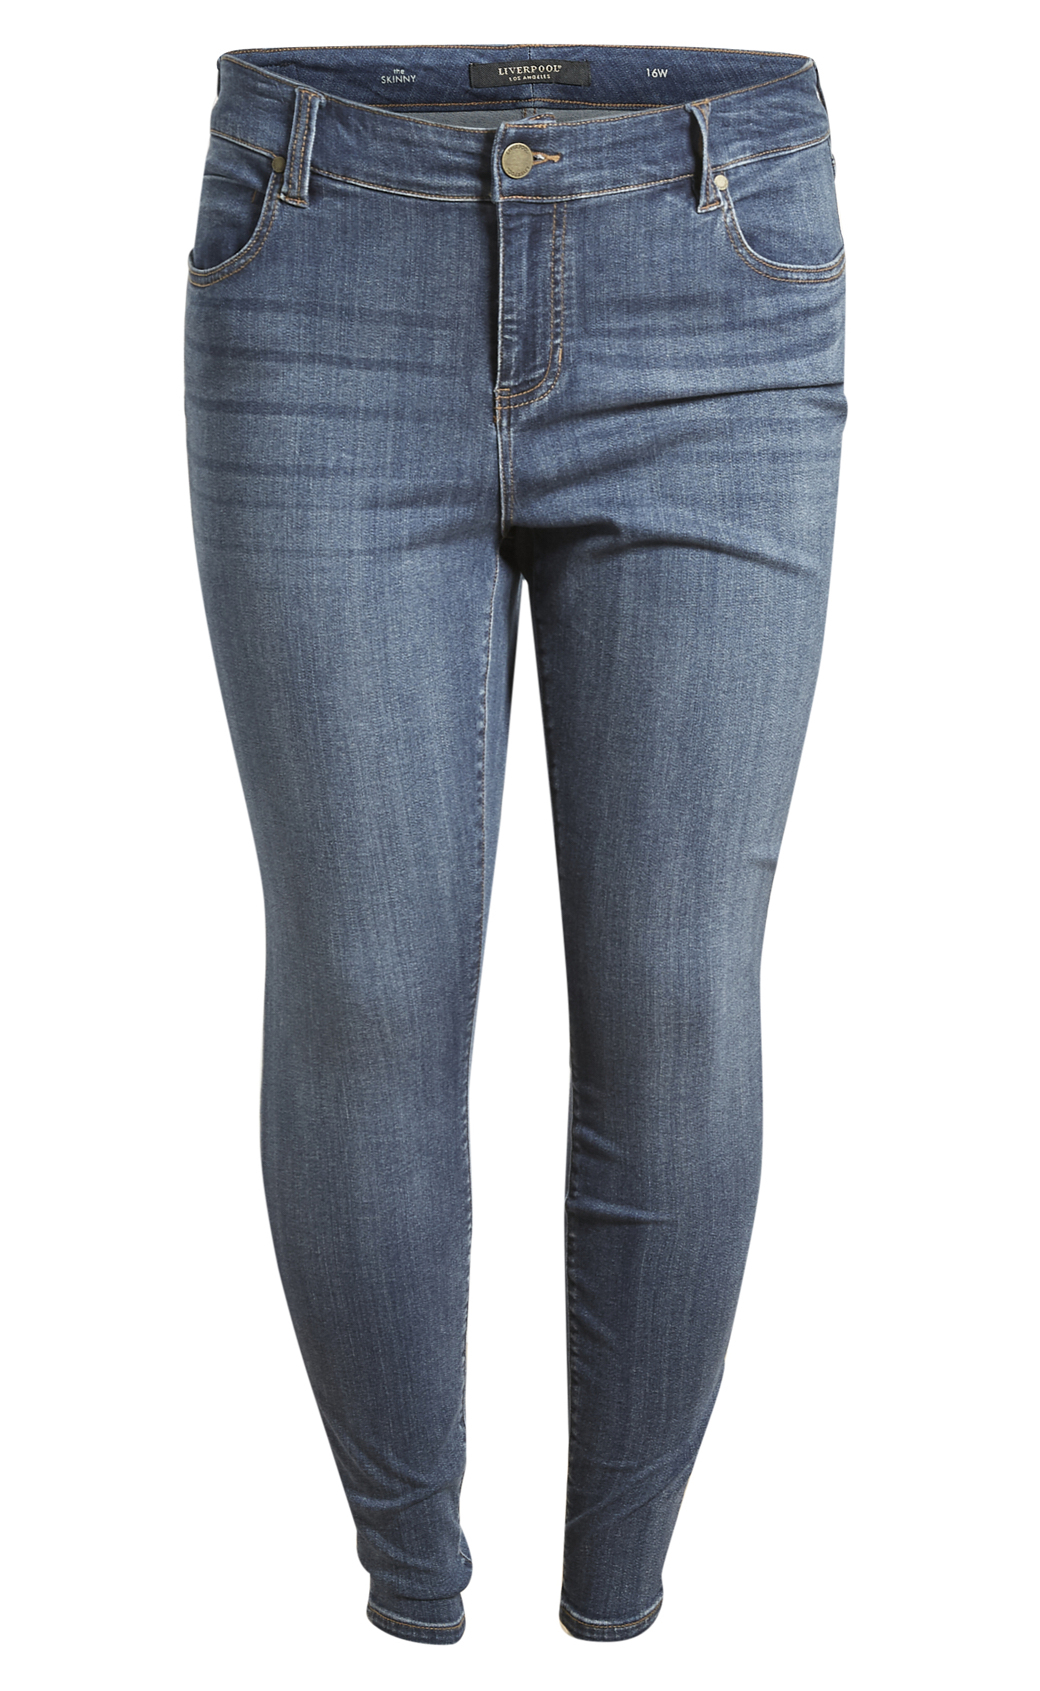 Liverpool High Rise Ankle Jean